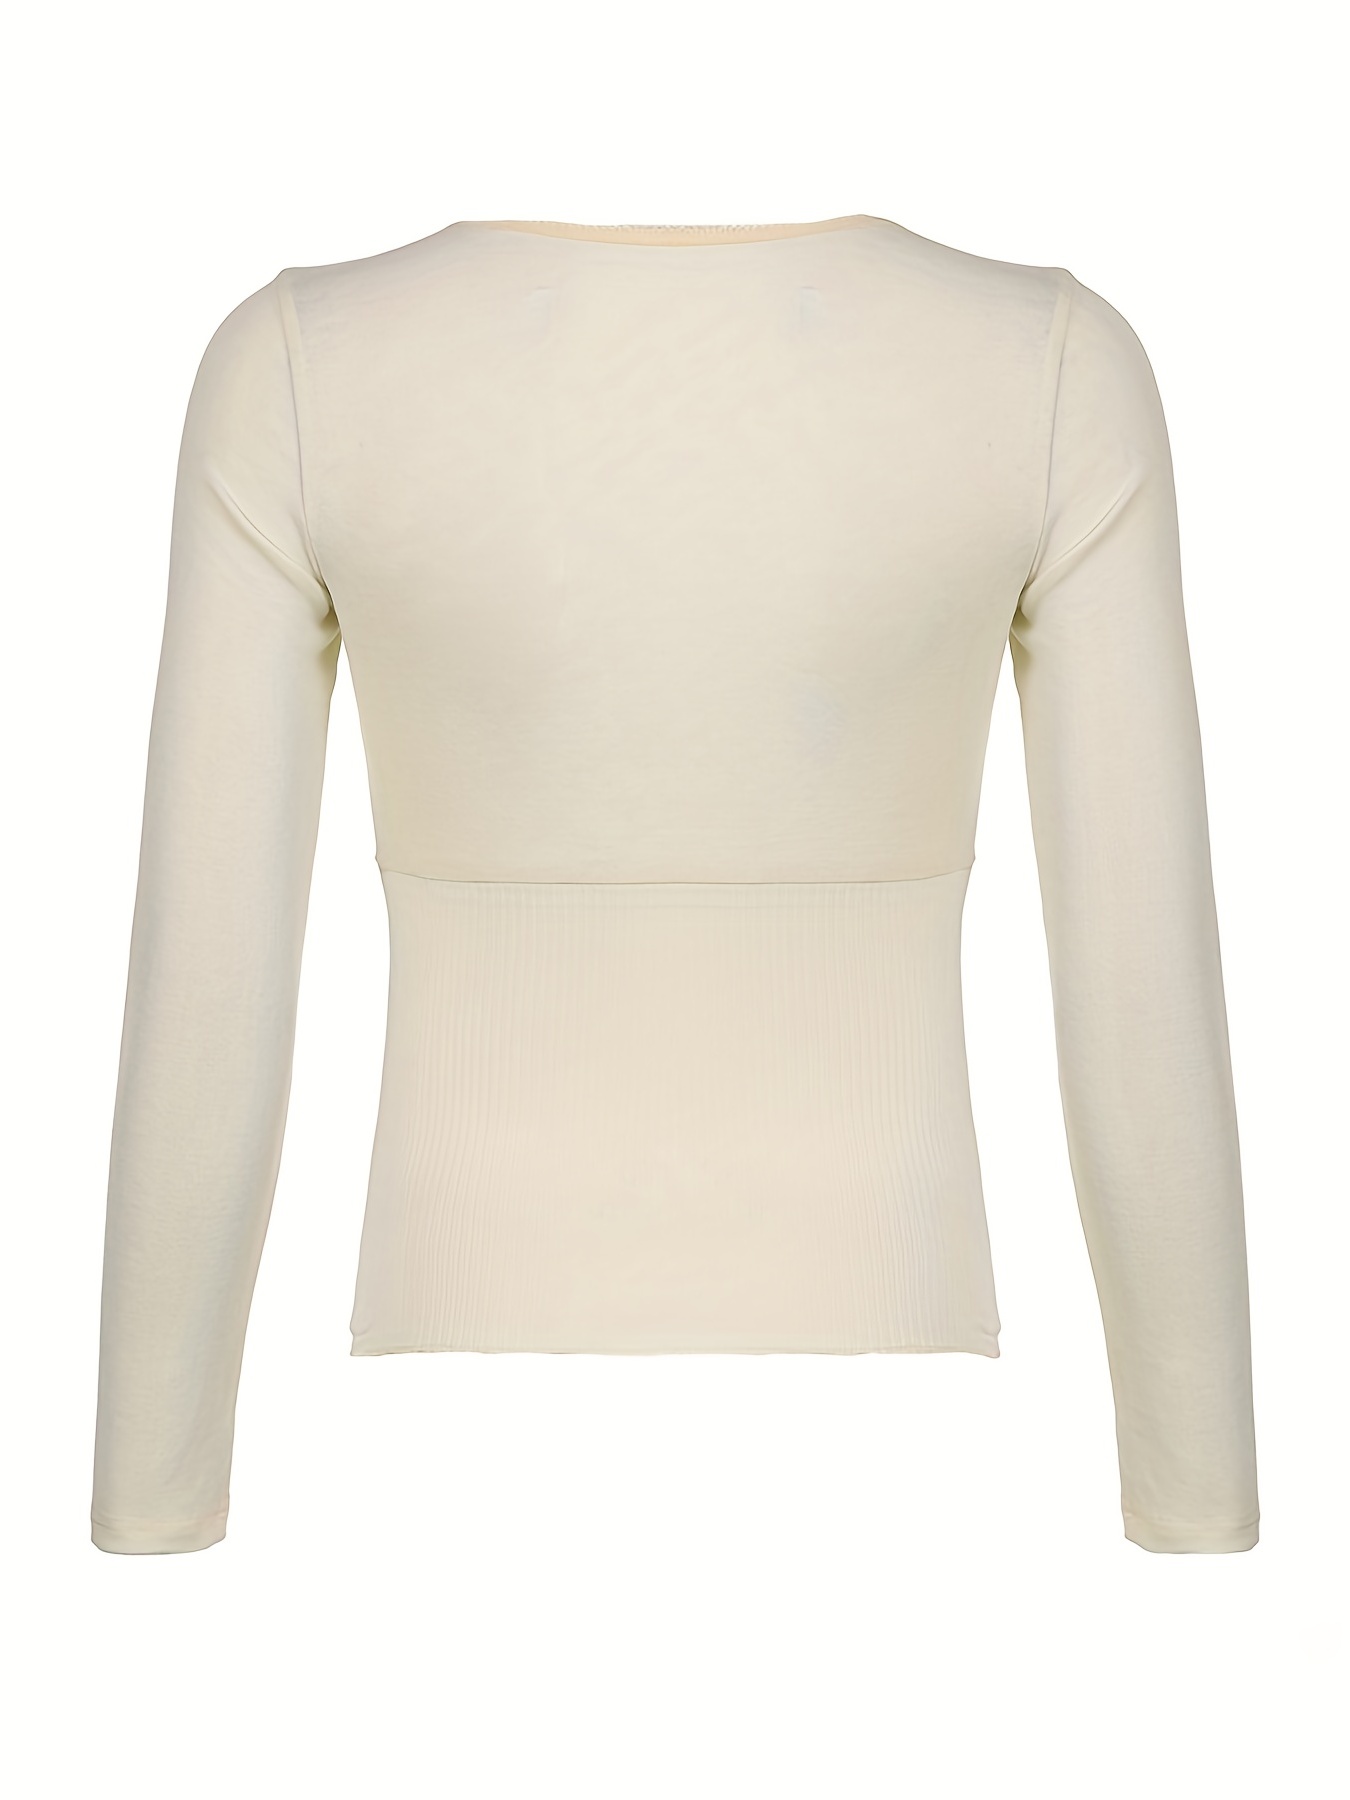 White Crop Tops, Inc Long Sleeved, Lace & Ribbed